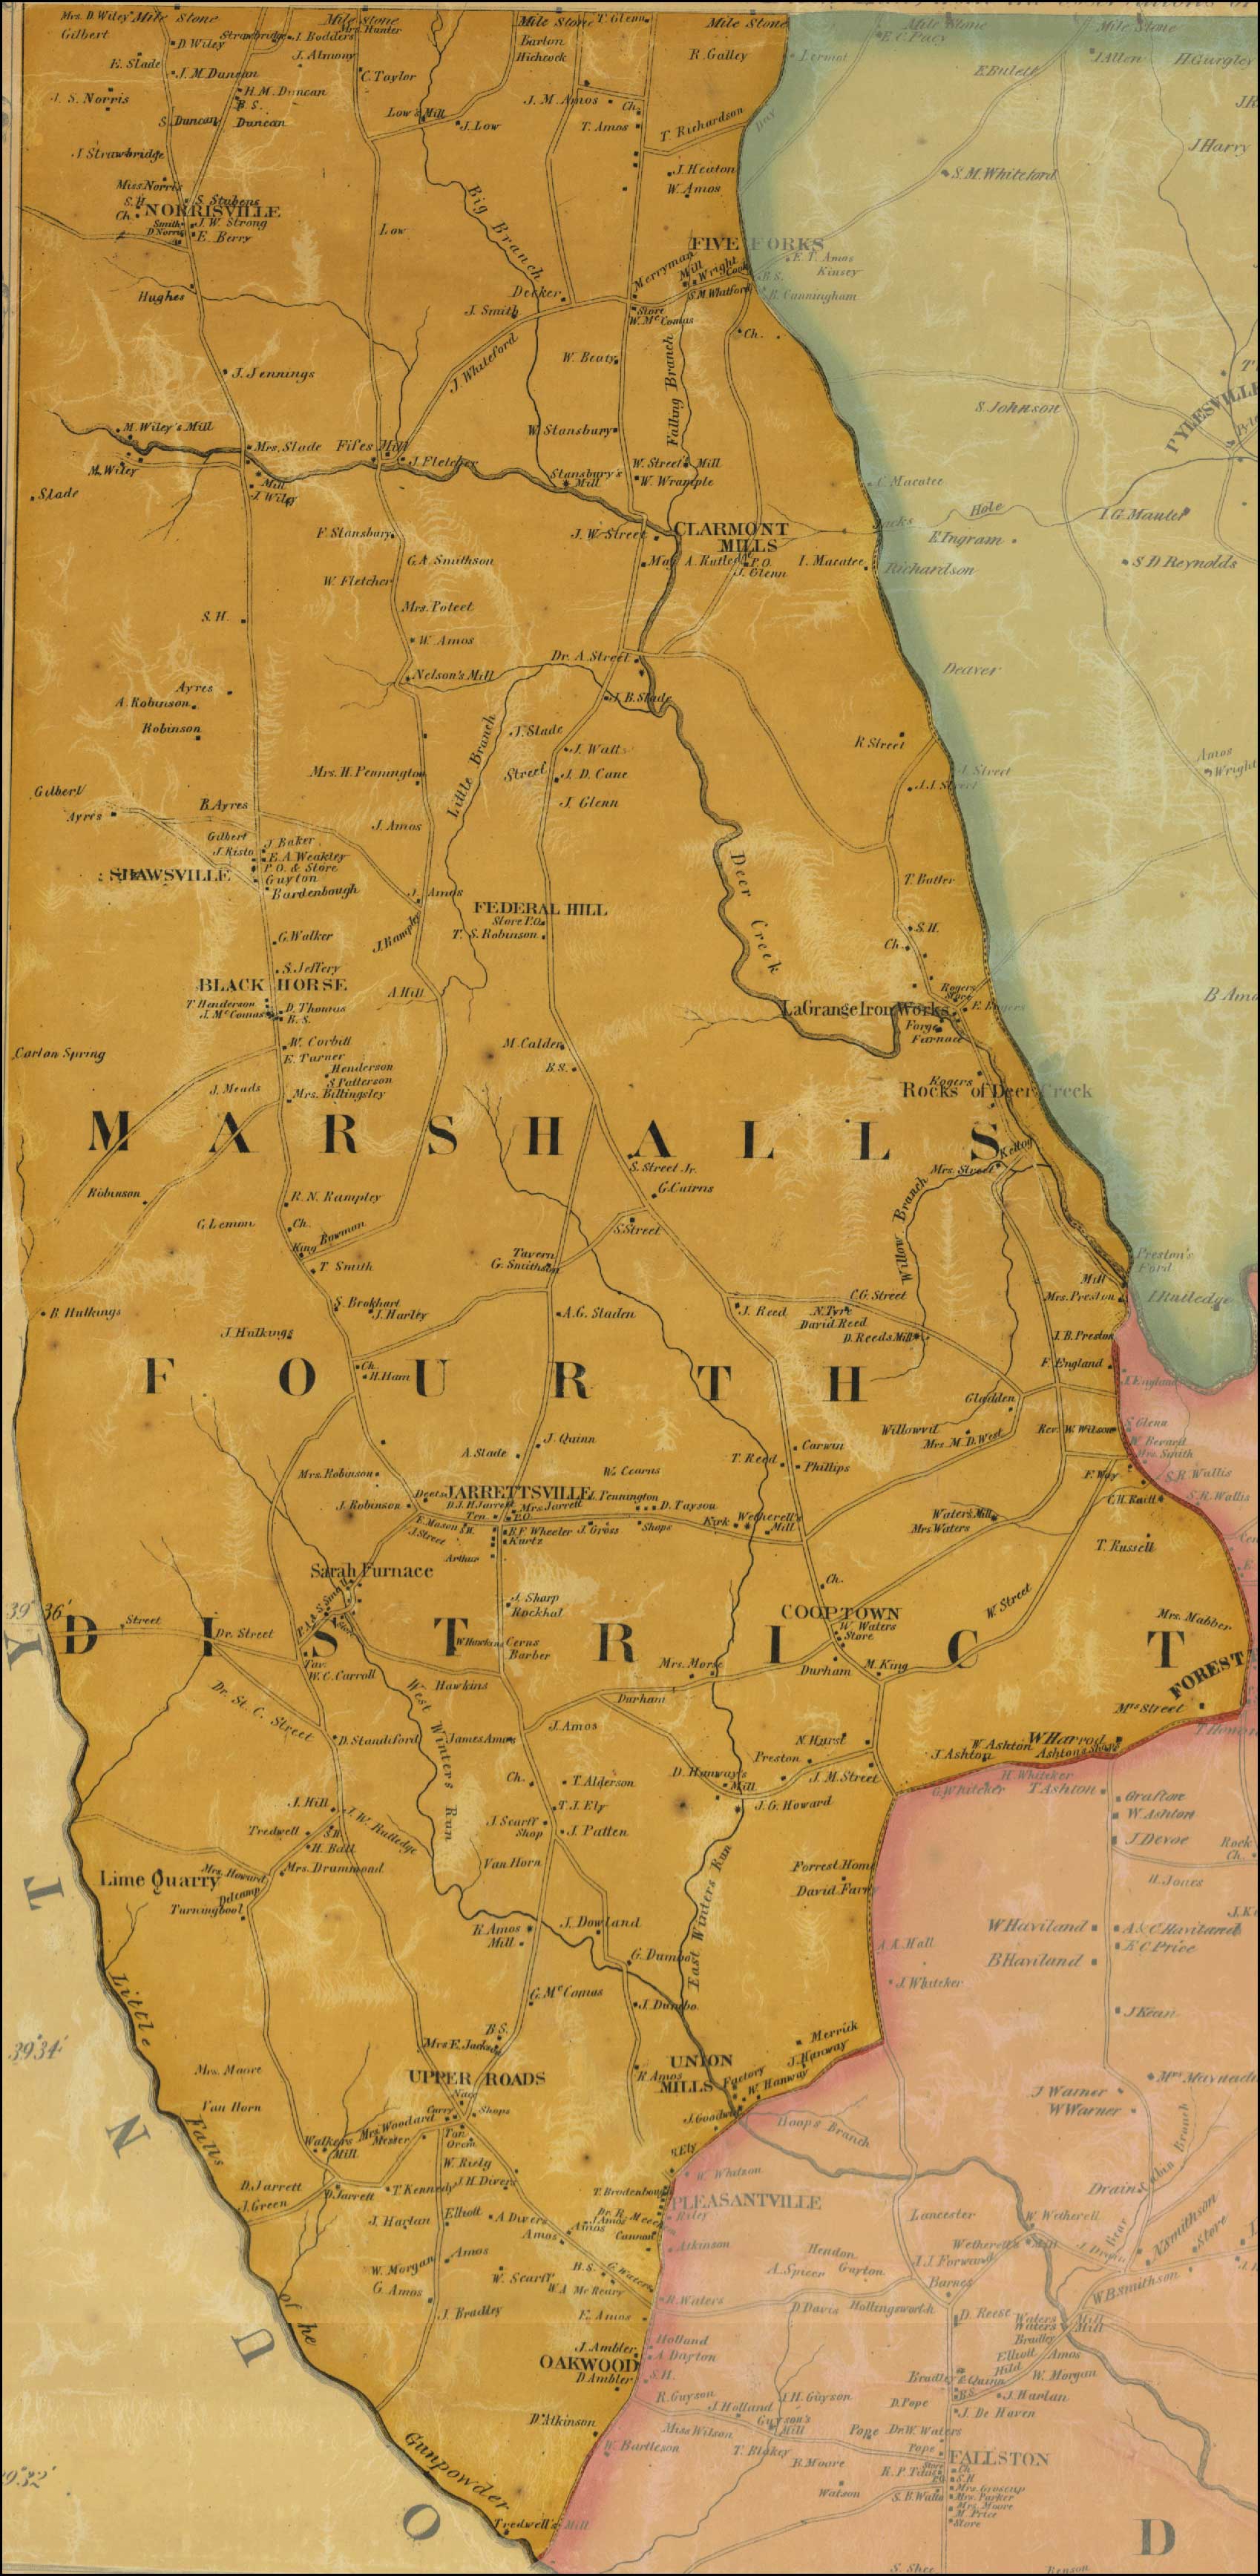 Jennings and Herrick, Map of Harford County, 1858, Library of Congress, MSA SC 1213-1